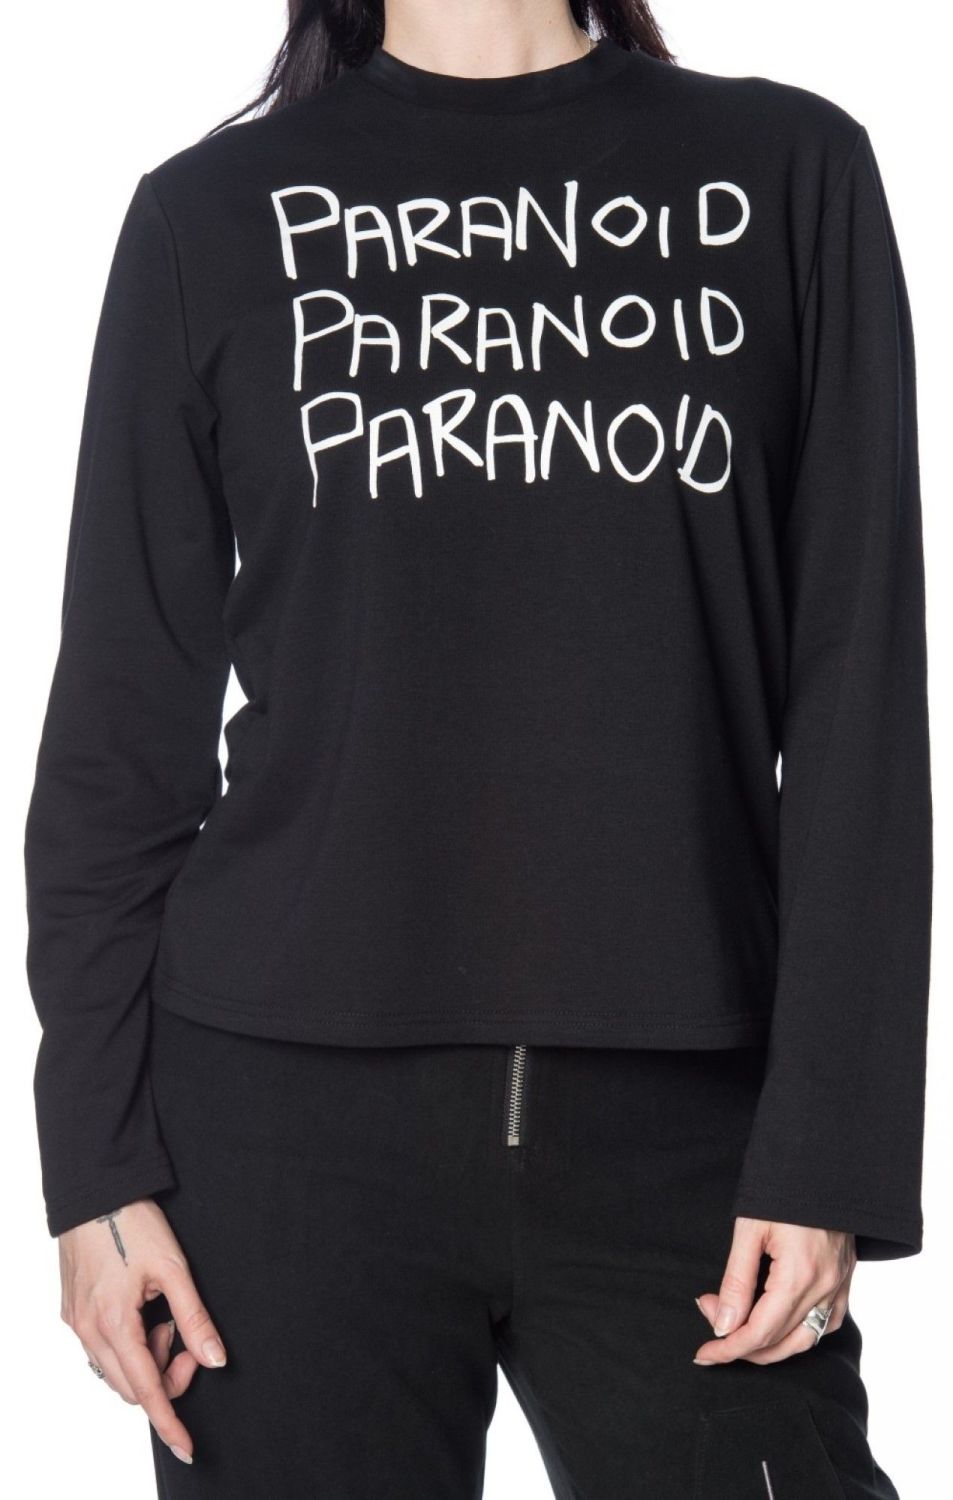 Paranoid top by Banned